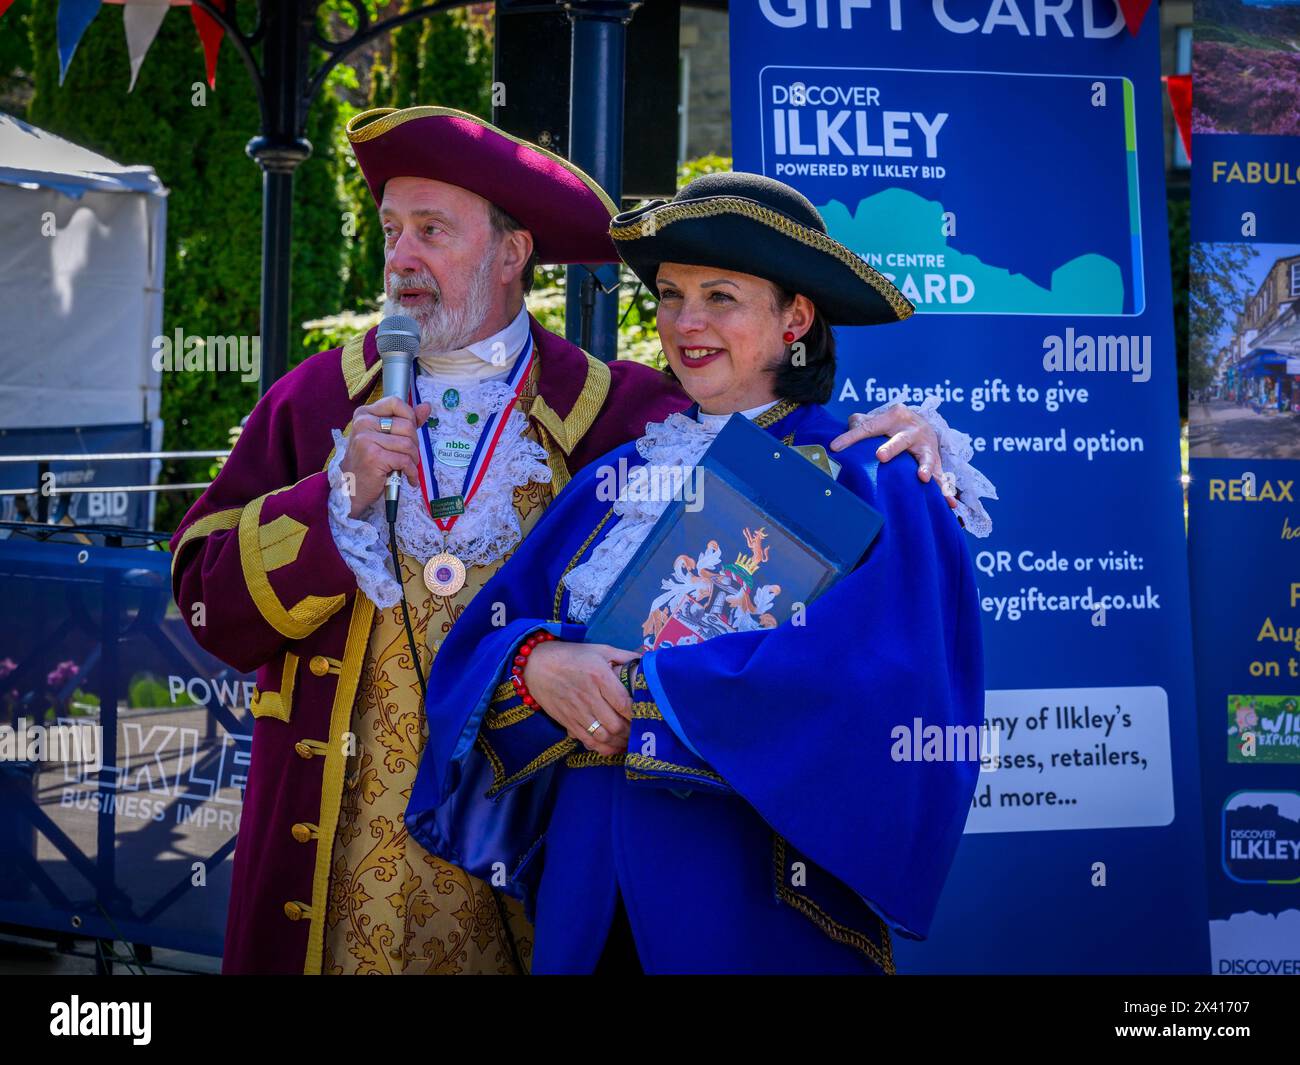 Town criers standing together side by side (lady crier & 1st first prize award winner, colourful criers' livery) - Ilkley, West Yorkshire, England UK. Stock Photo